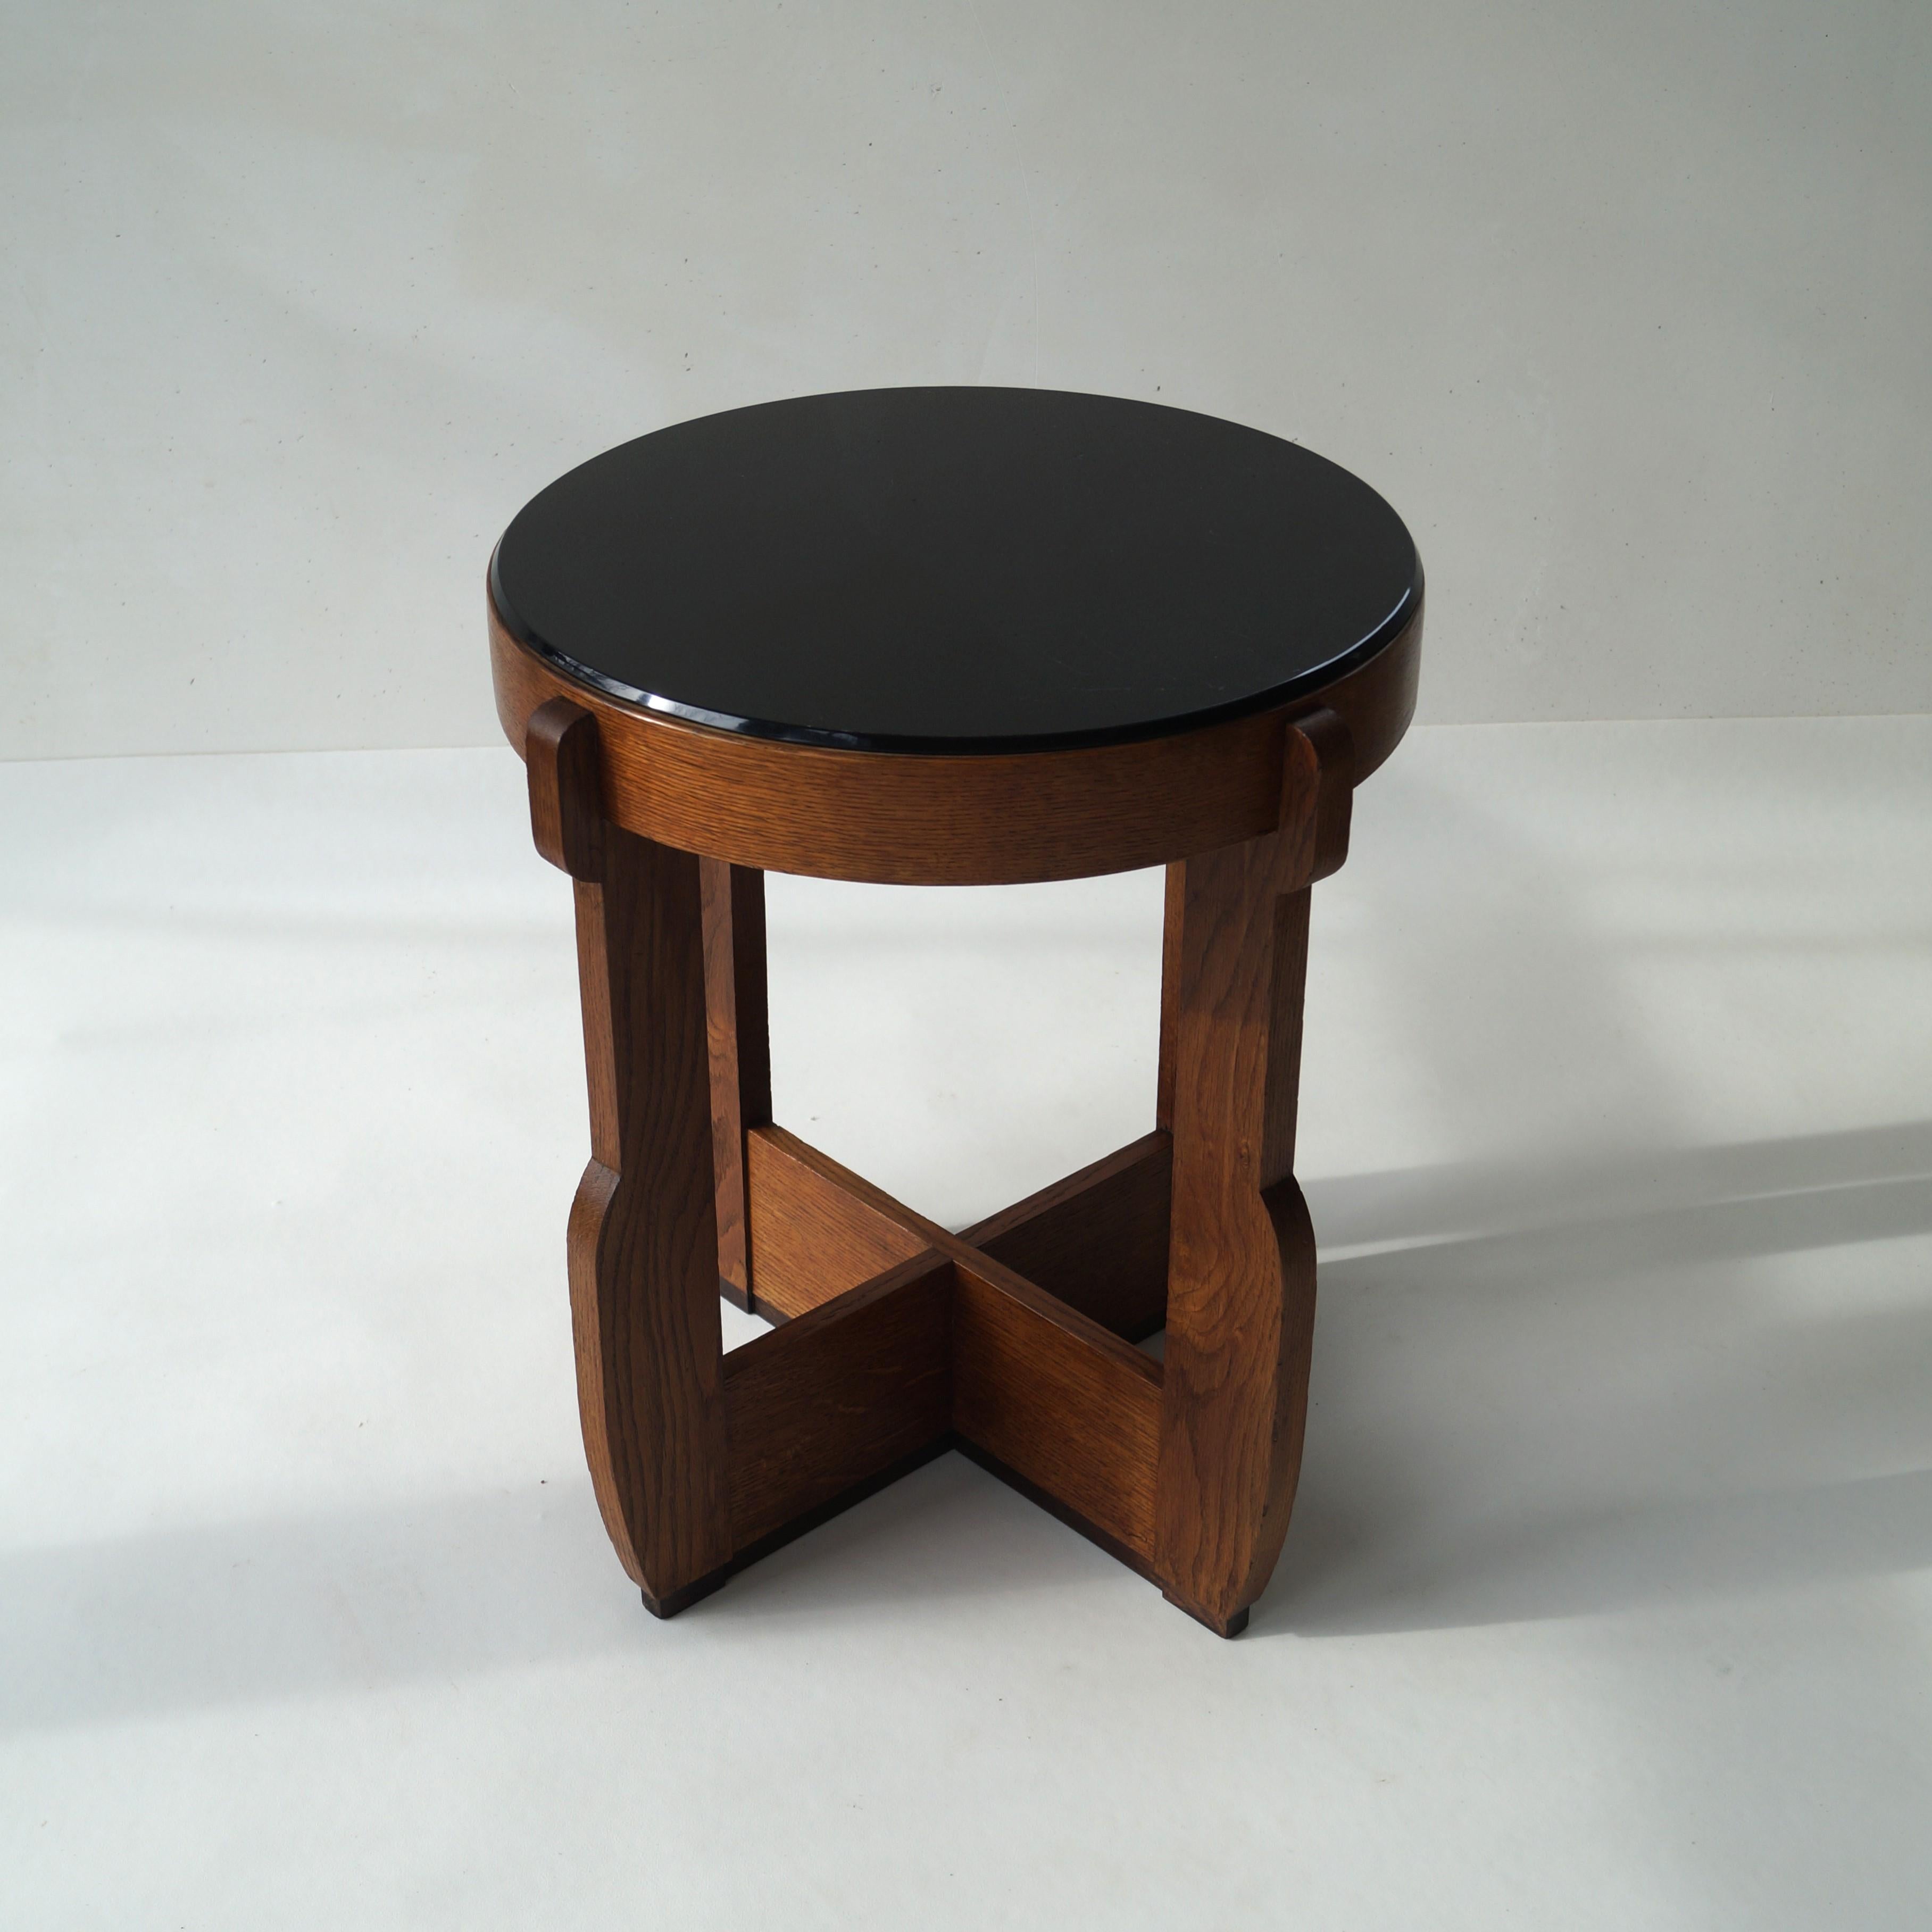 Elegant Dutch Art Deco occasional table or cocktail table, late 1920s to early 1930s, in solid oak and a black glass inlaid top. The top is integrated. It  is quite an unusual and stylish design with a modernist twist.

The style is more The Hague